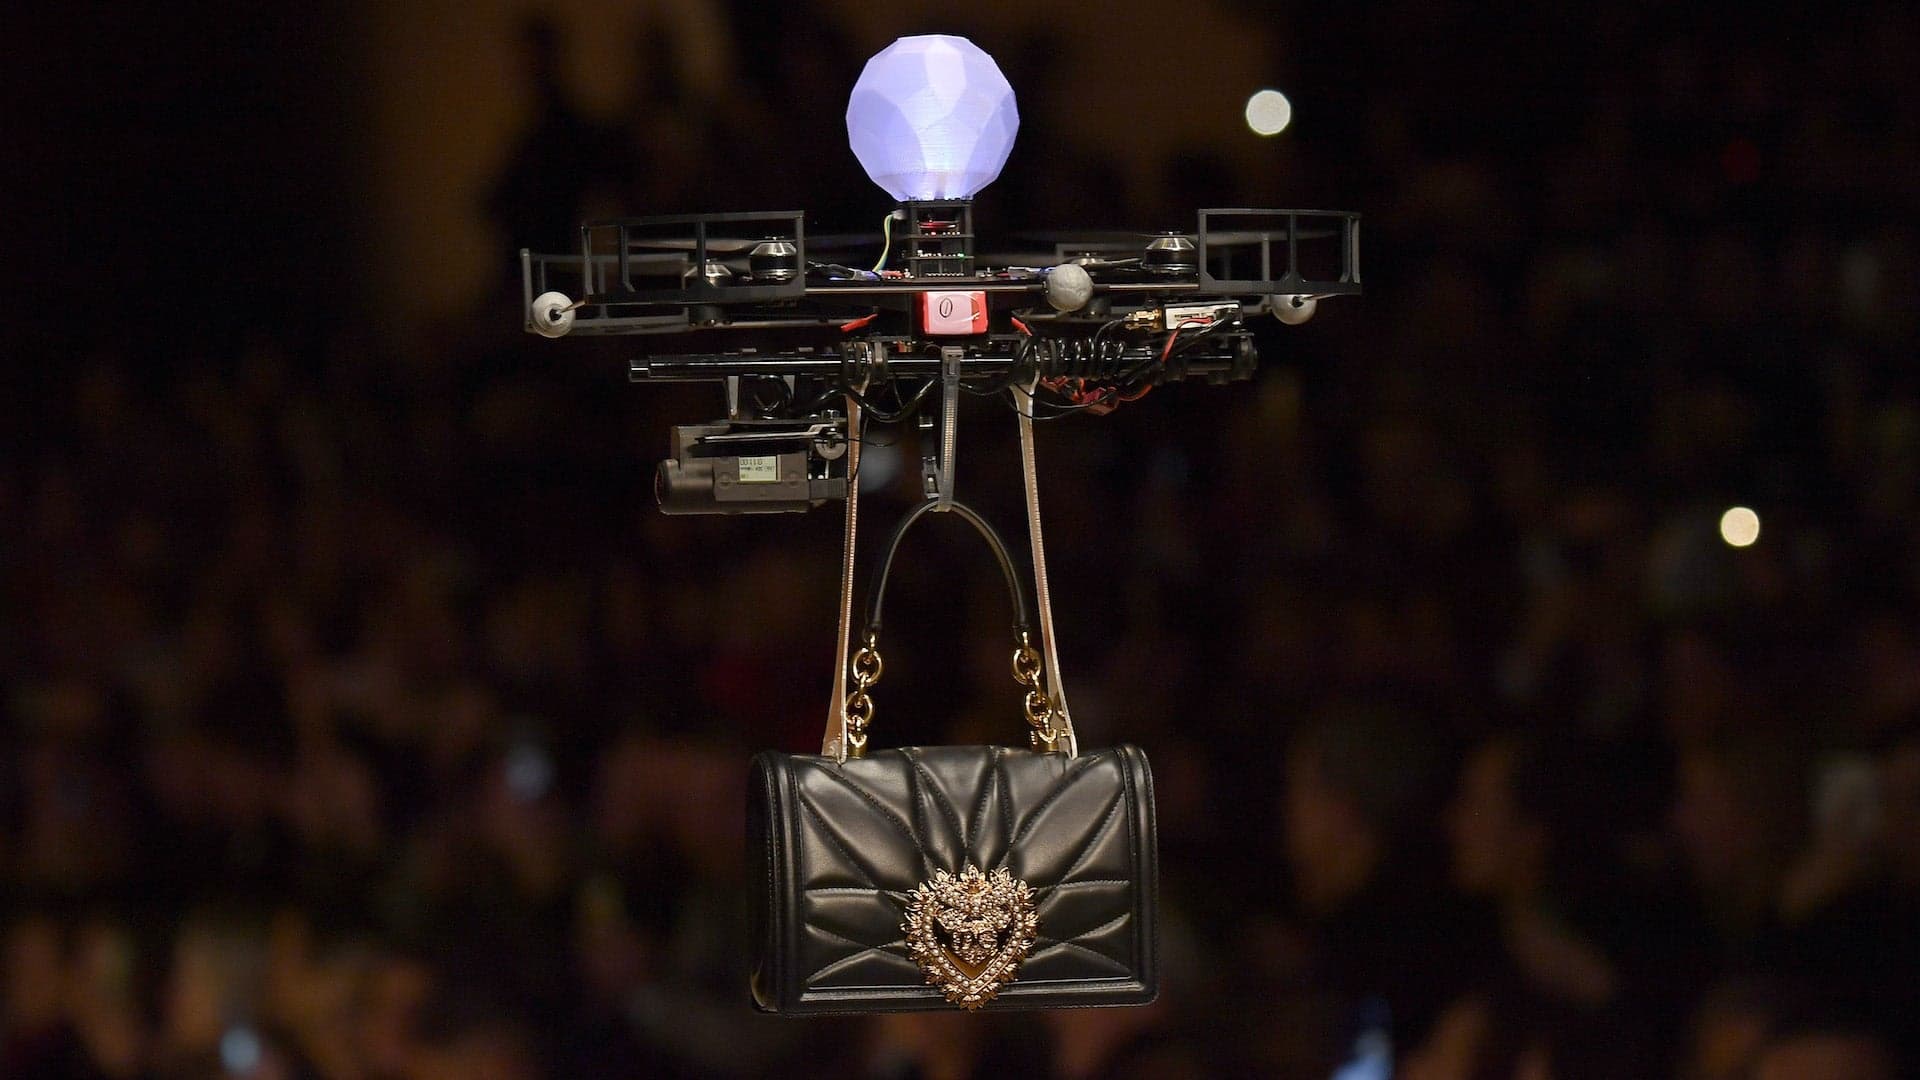 Drones Just Carried Dolce & Gabbana’s New Handbags Down the Runway